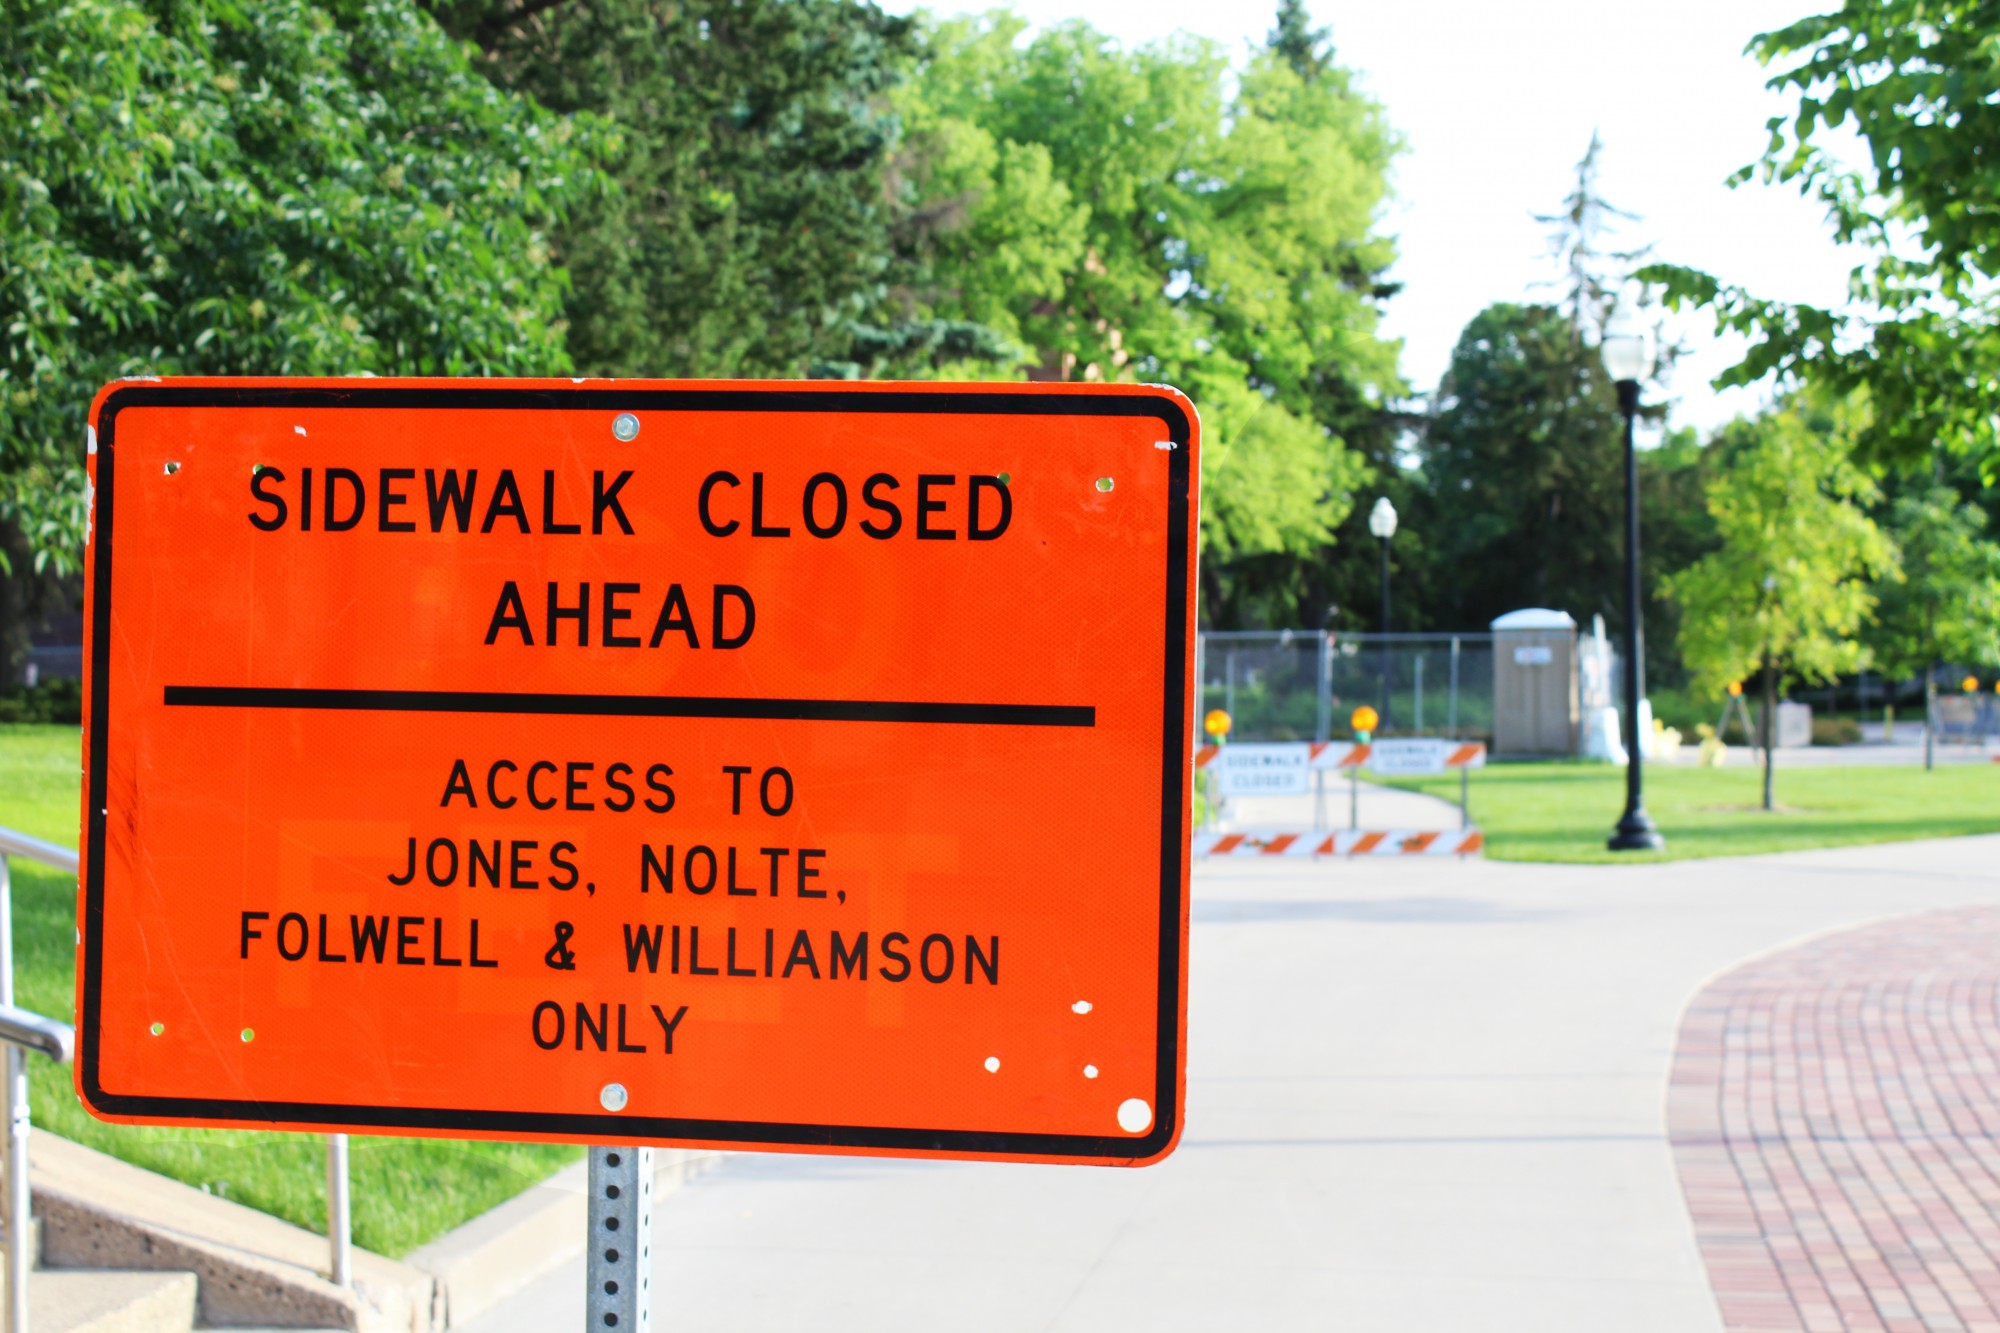 Signs across campus warn of oncoming construction projects on Sunday, May 31.